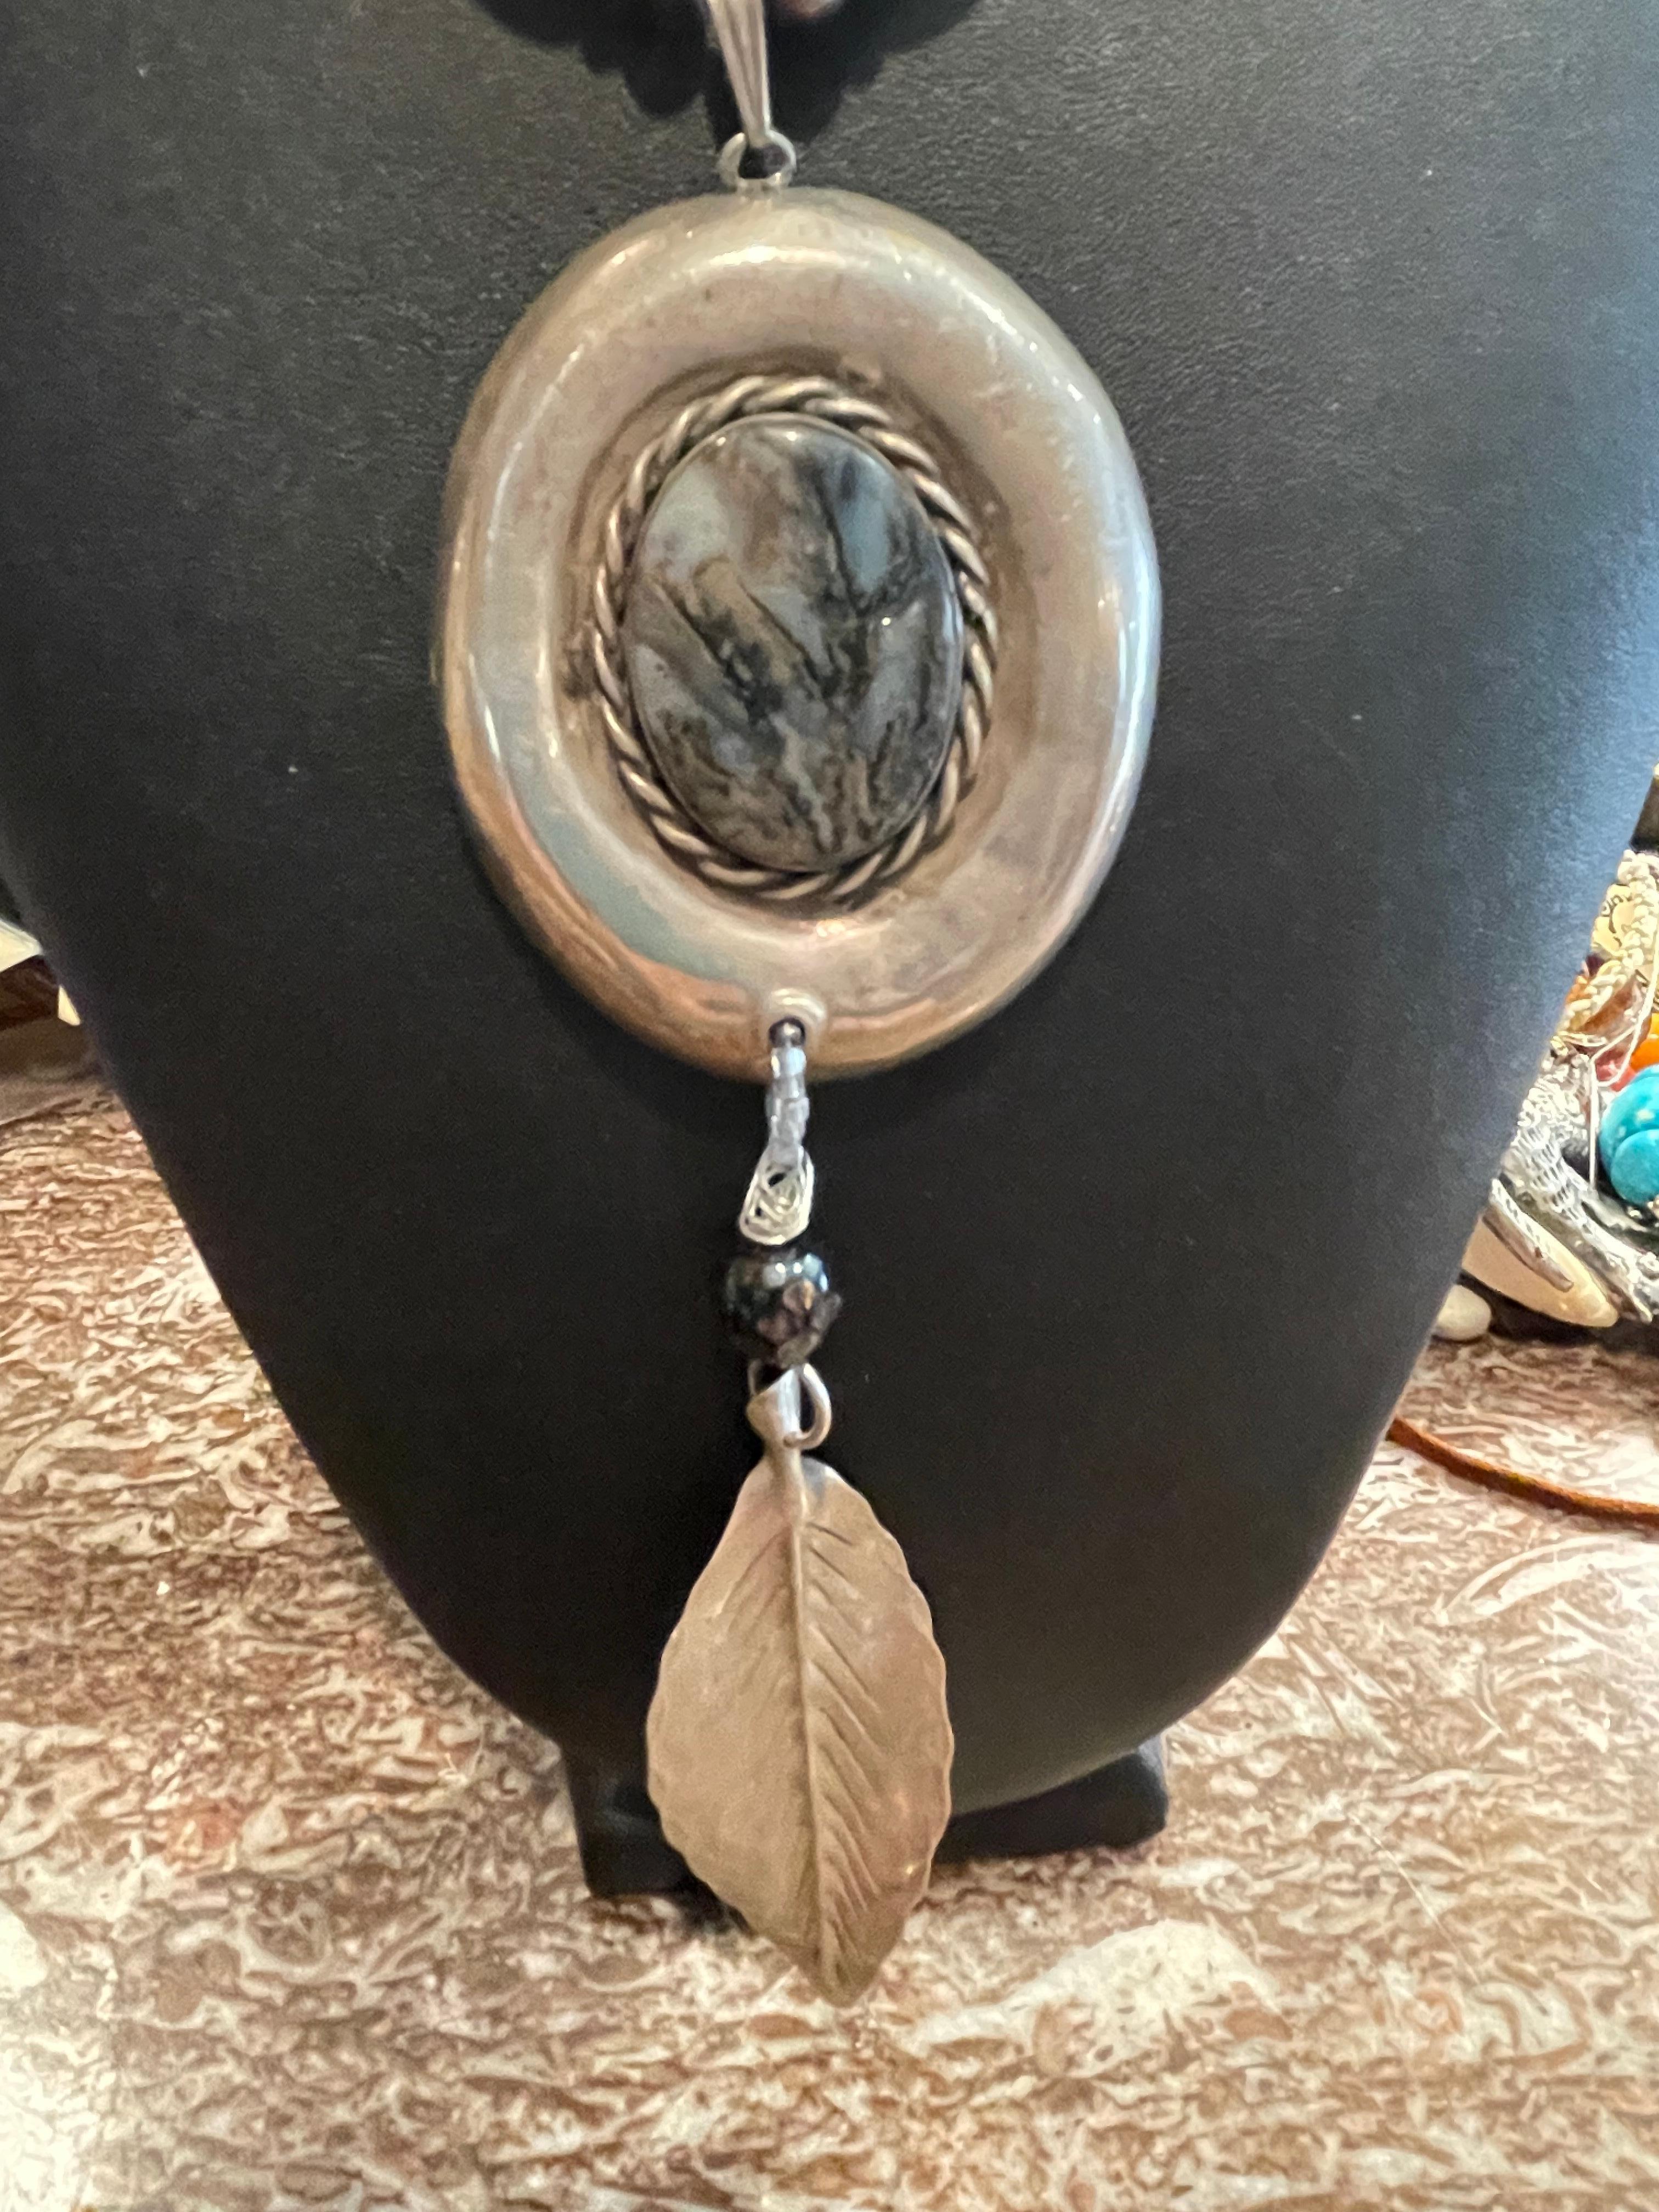 LB Vintage Sterling Silver and Charorite pendant with vintage sterling silver leaf brooch accent with Amethyst beads emphasizing the coolness of the Sterling beads. This handmade, one of a kind, piece would be a glamorous and versatile addition to